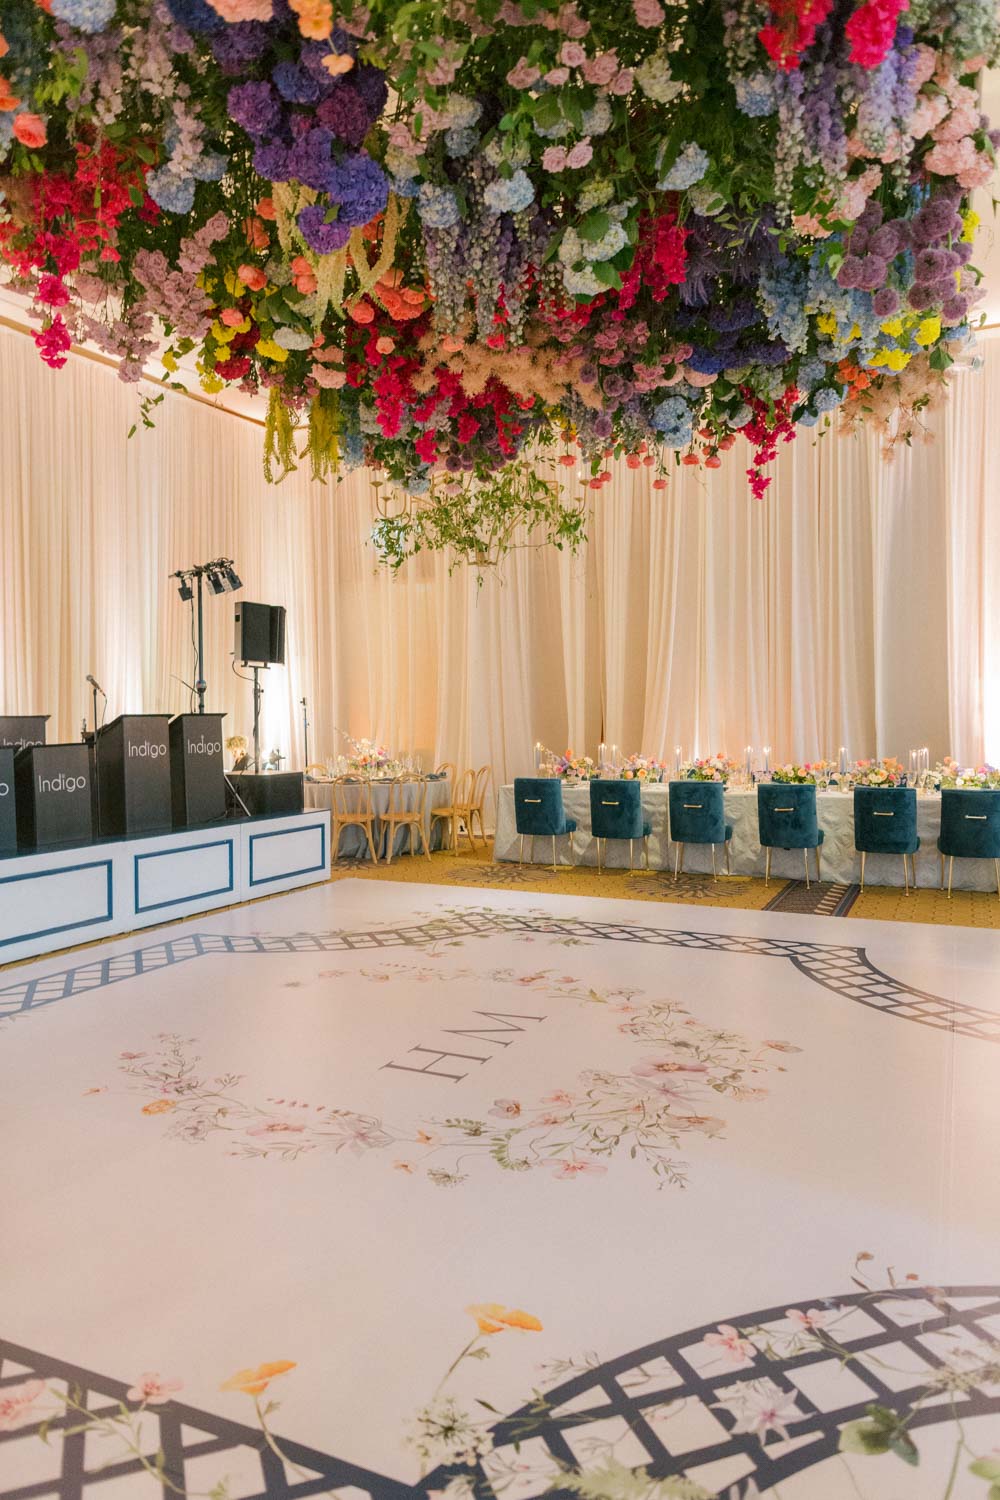 Colorful wedding flowers drape from the ceiling over a custom designed dance floor with the couple's monogrammed initials